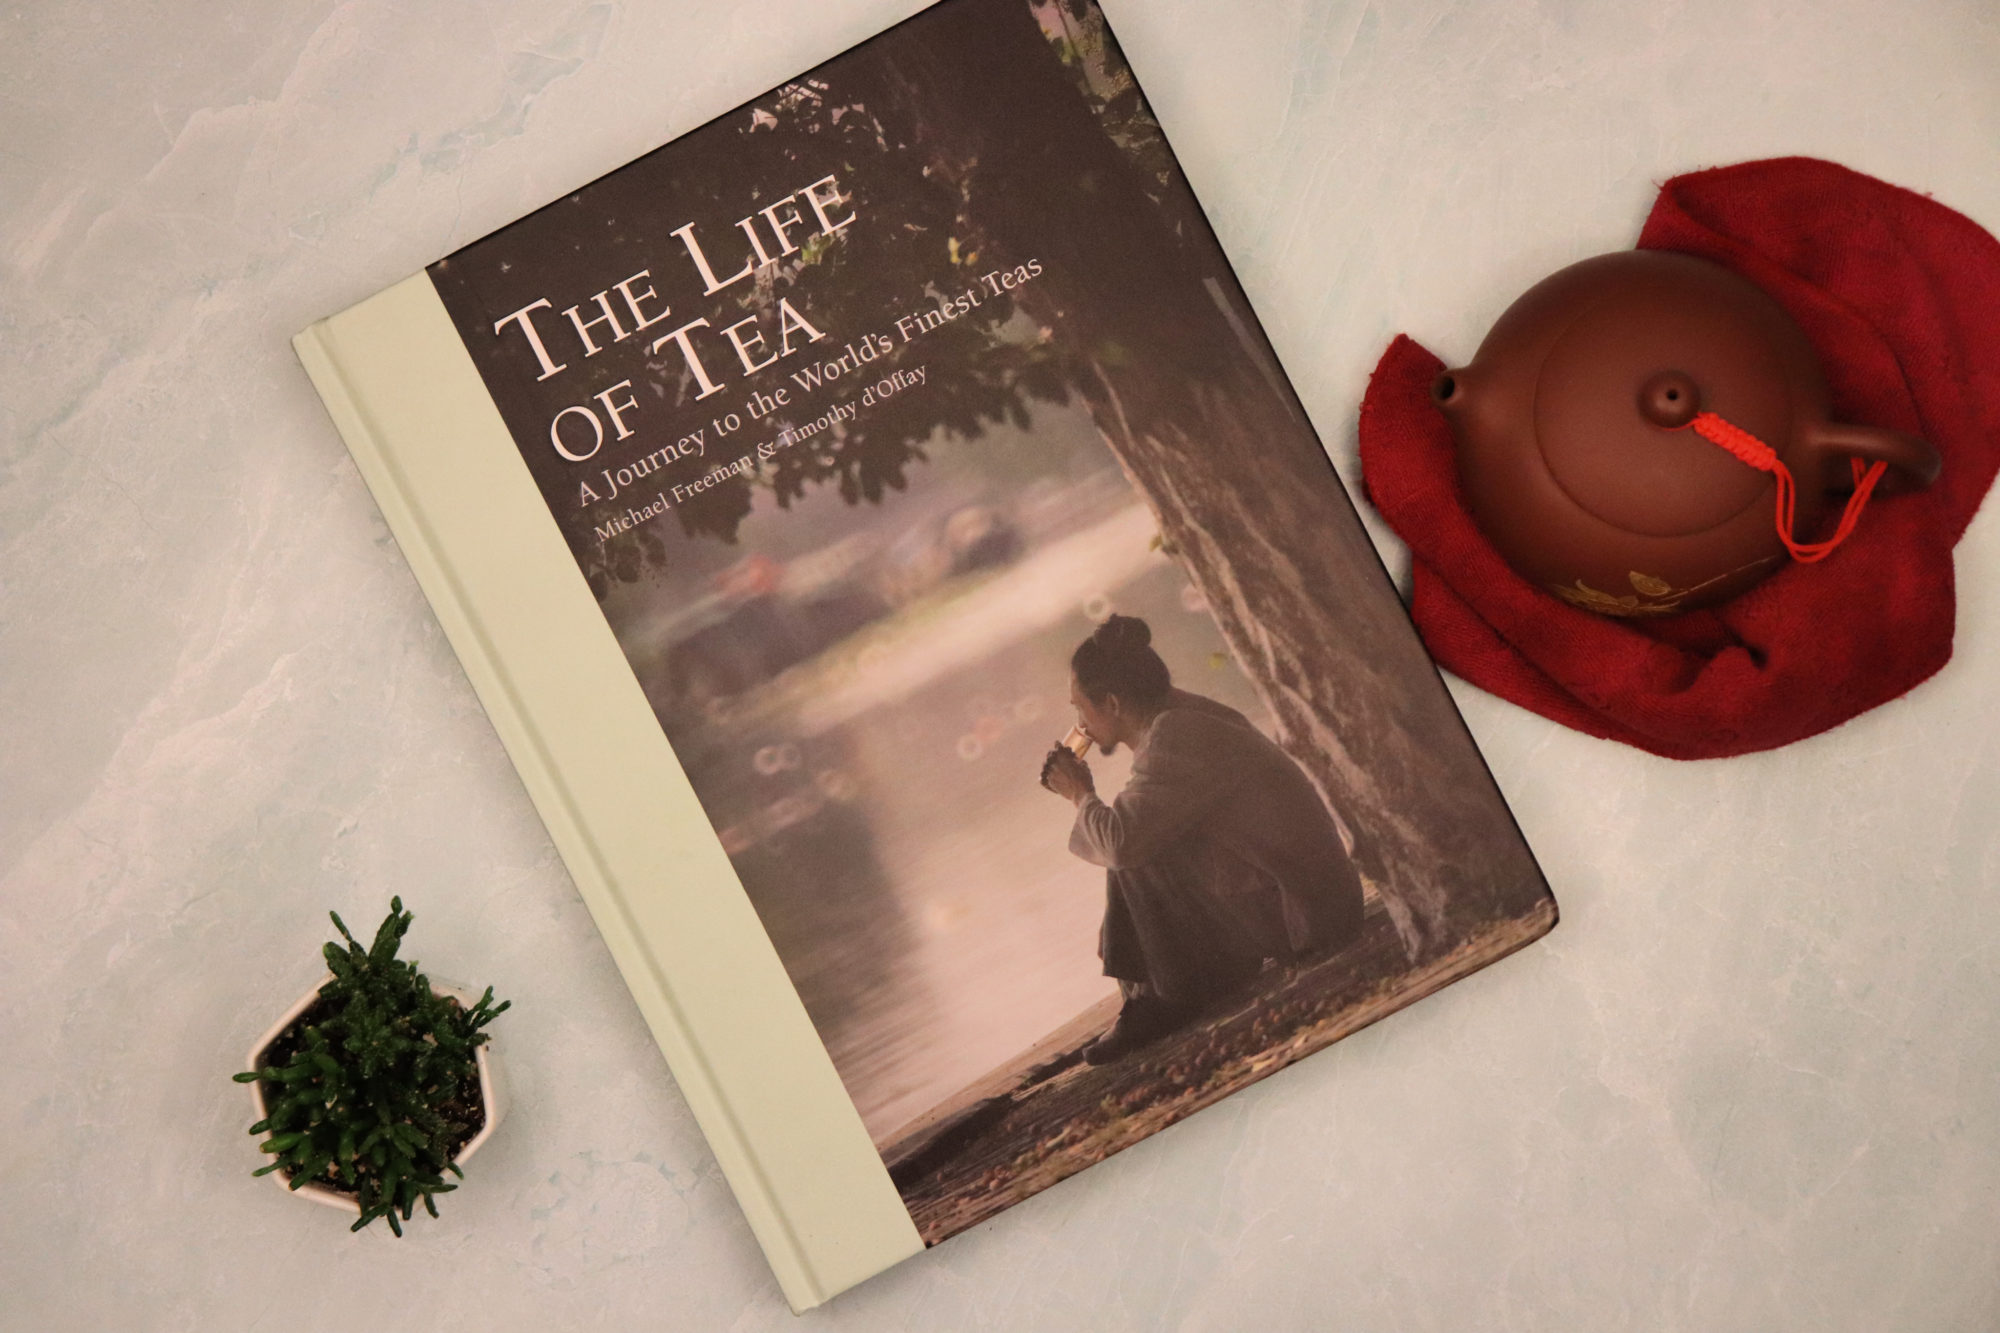 The Life of Tea: A Journey to the World’s Finest Teas by Michael Freeman & Timothy d’Offay